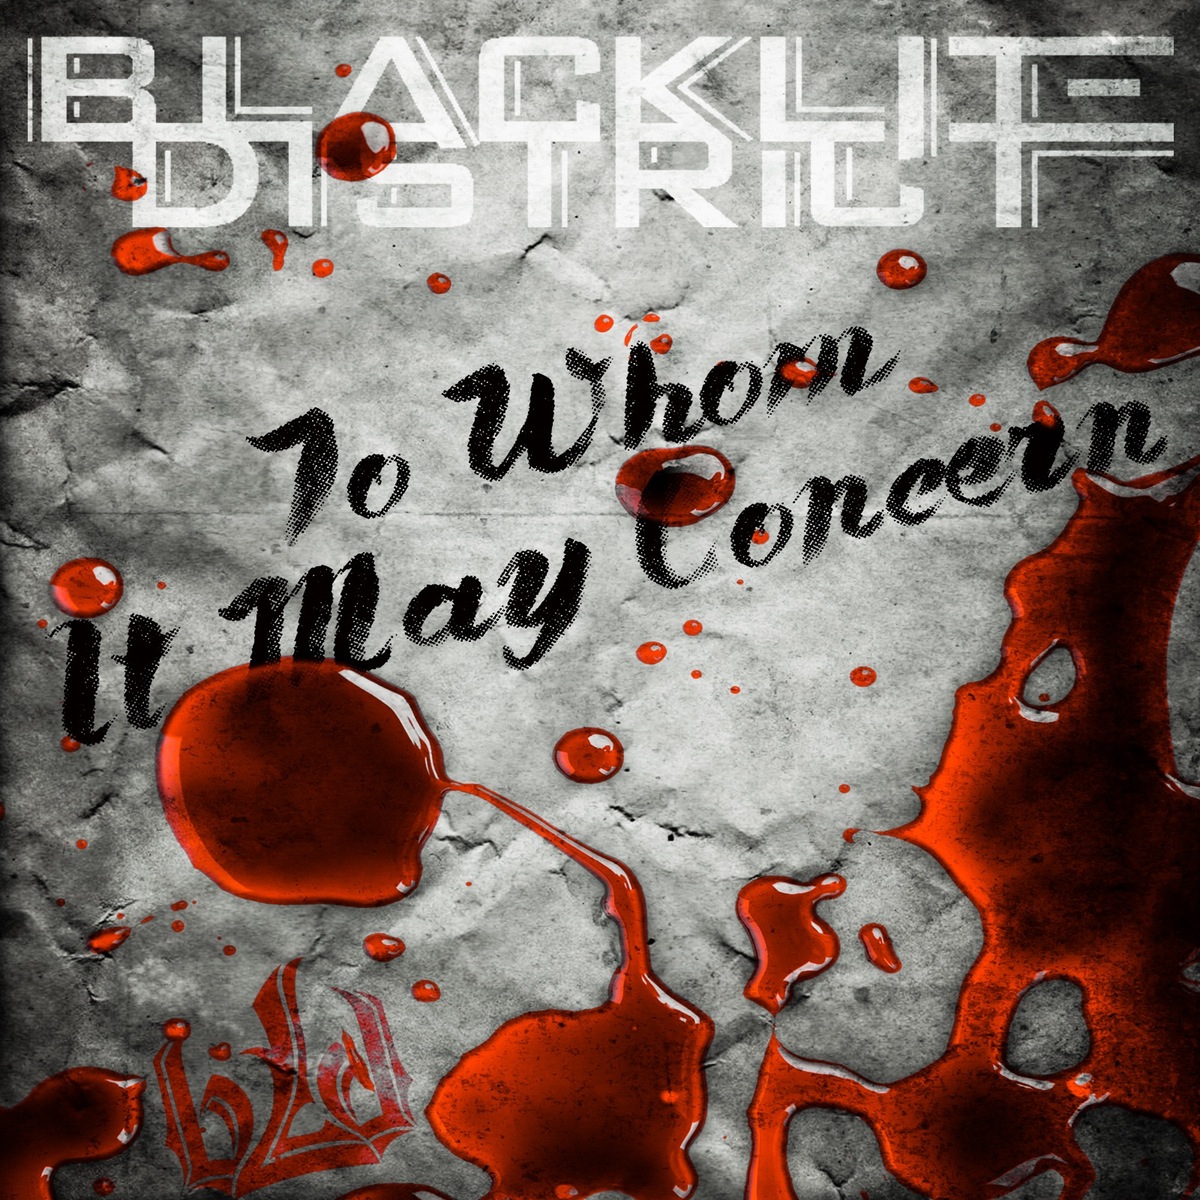 Blacklite District - To Whom It May Concern (2016) Album Info